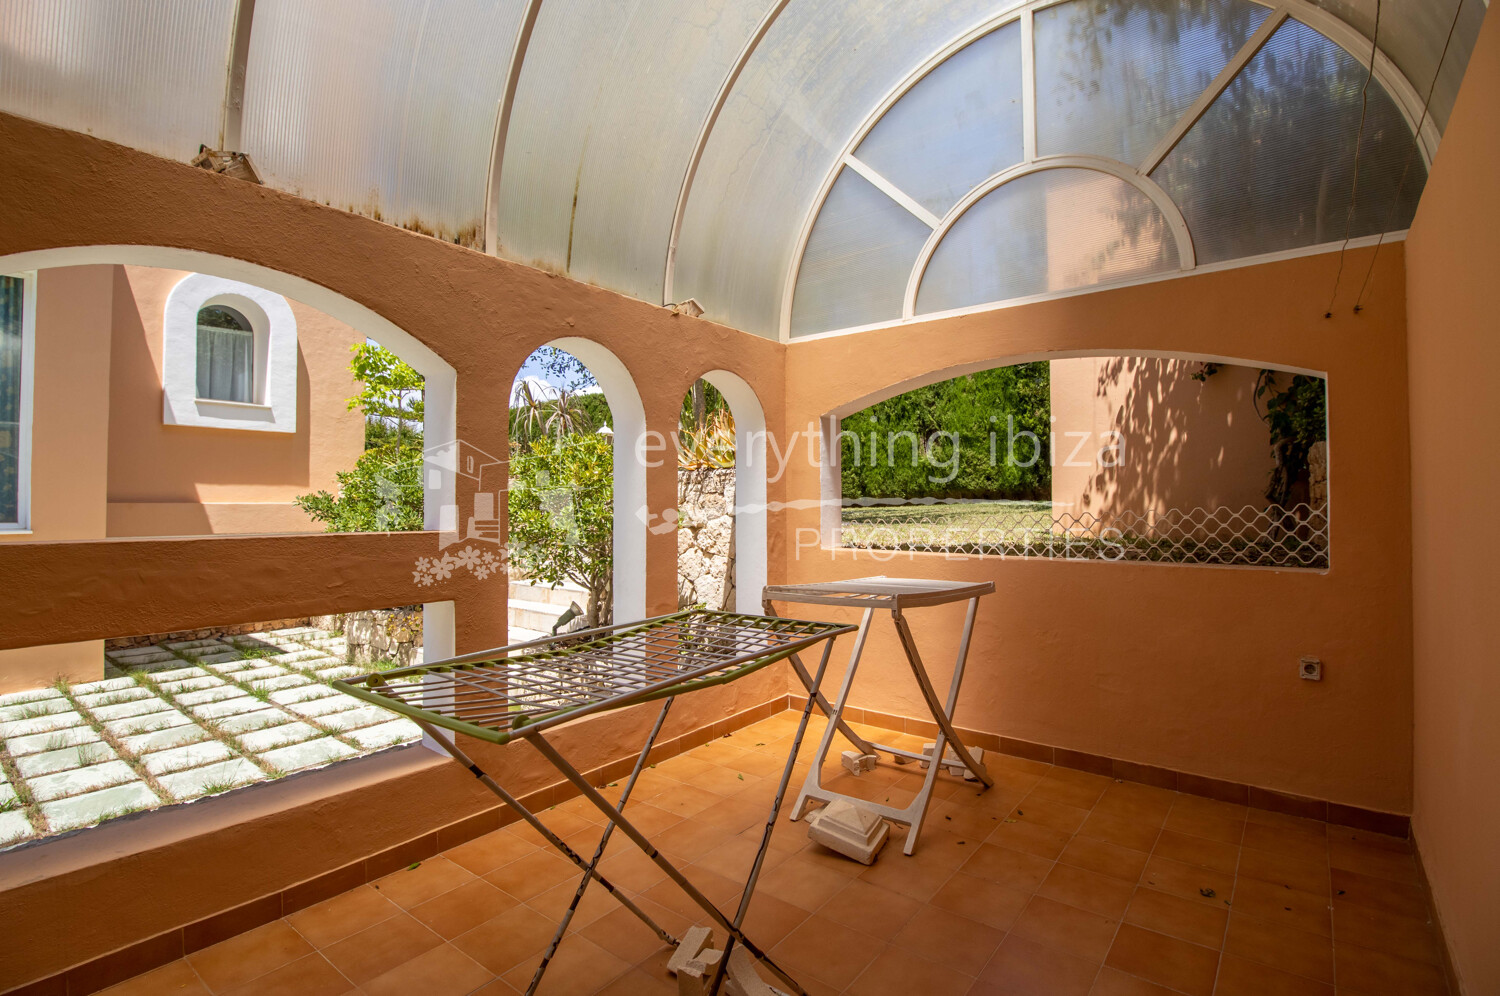 A Classically Beautiful Villa Boasting Sea & Ibiza Town Views, ref. 1607, for sale in Ibiza by everything ibiza Properties